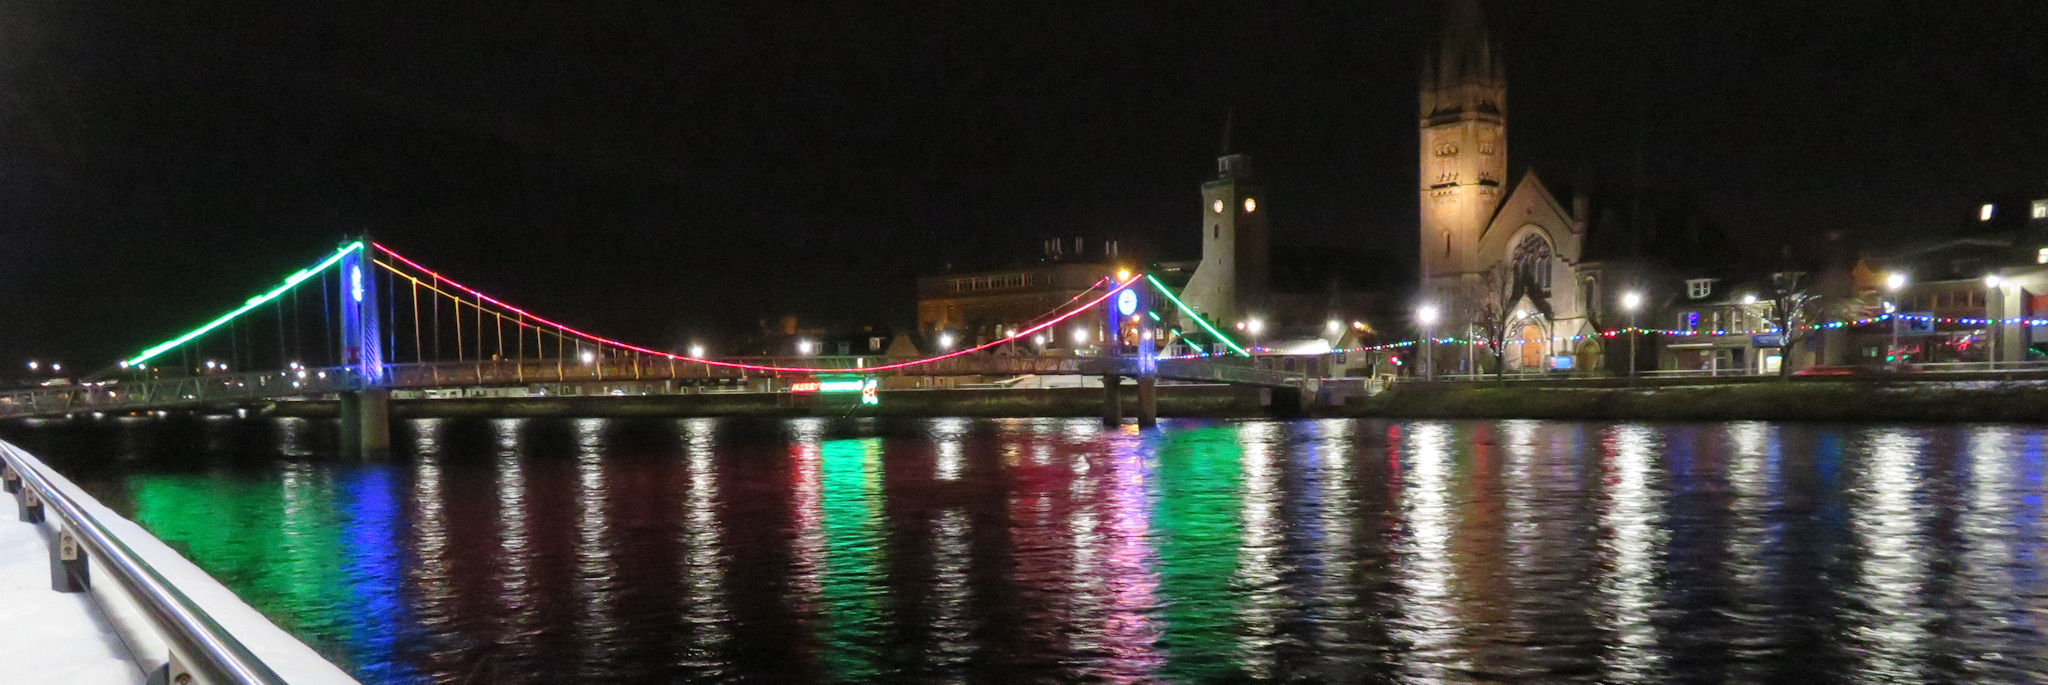 Inverness at Christmas